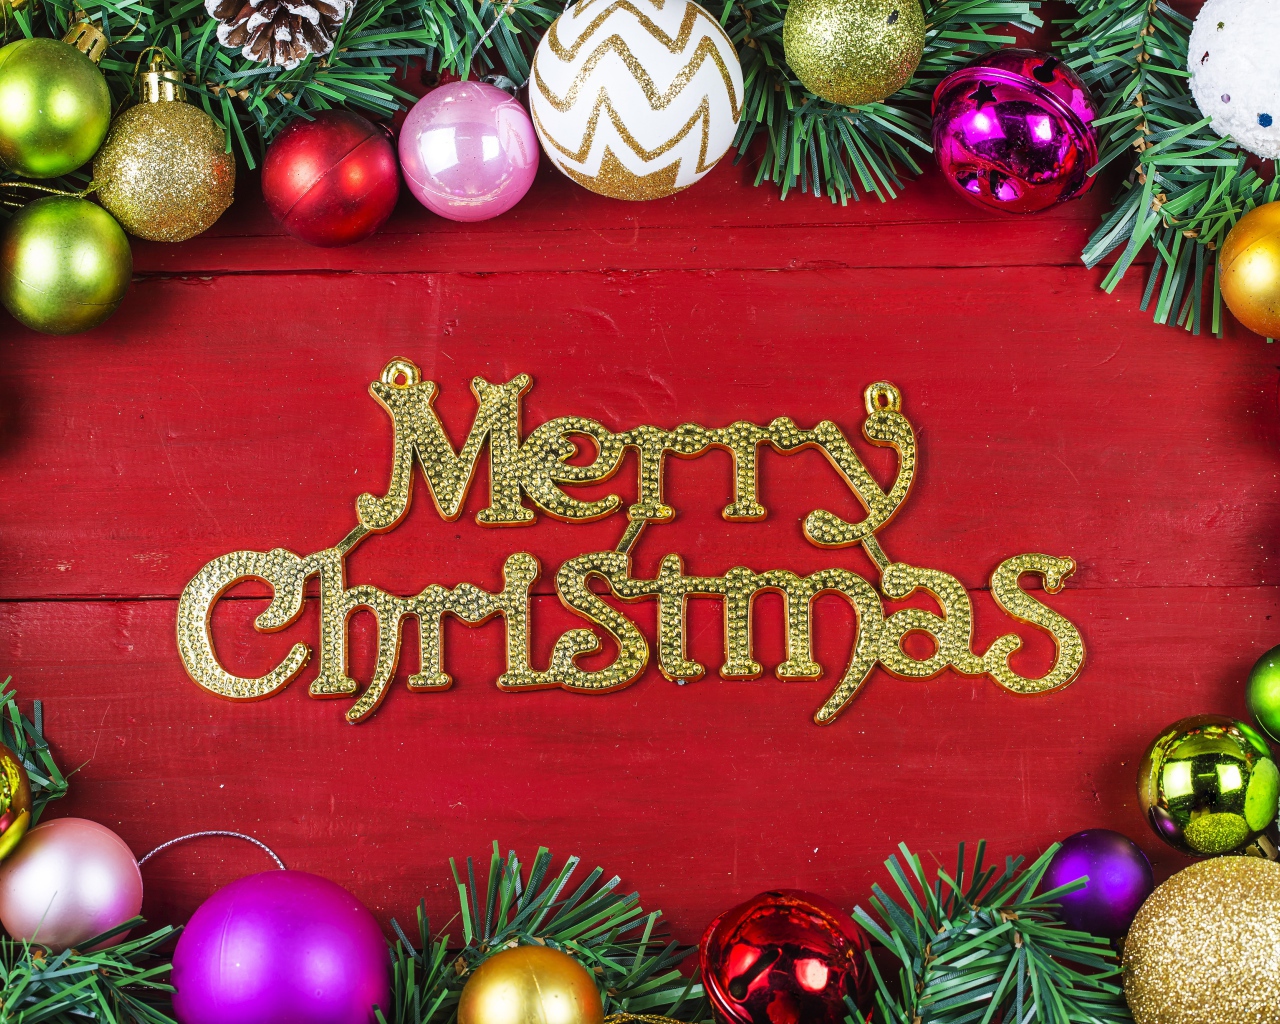 Merry Christmas inscription on a red background with Christmas-tree decorations for Christmas